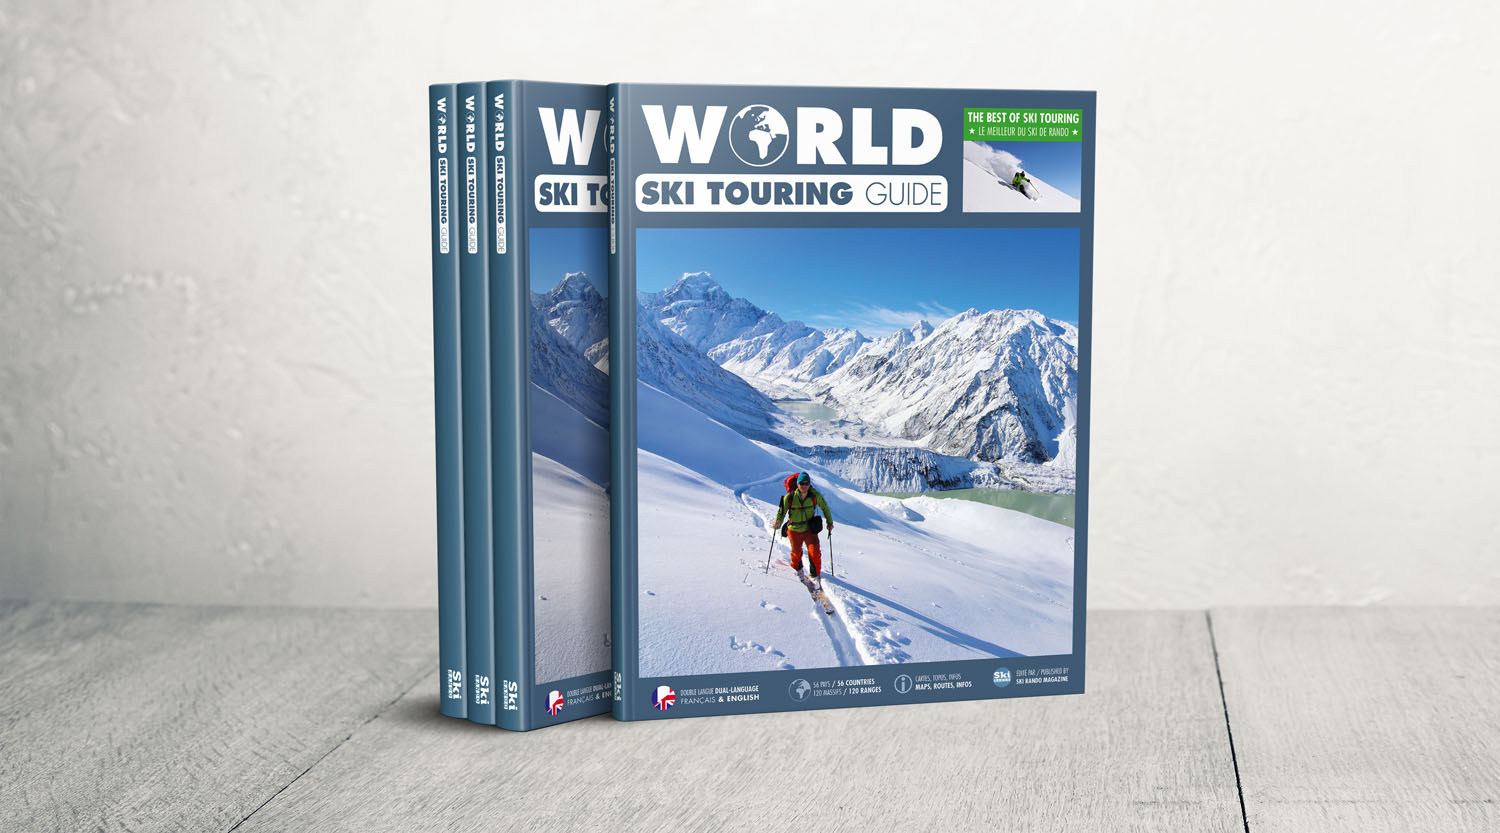 World Ski Touring Guide: Book Review